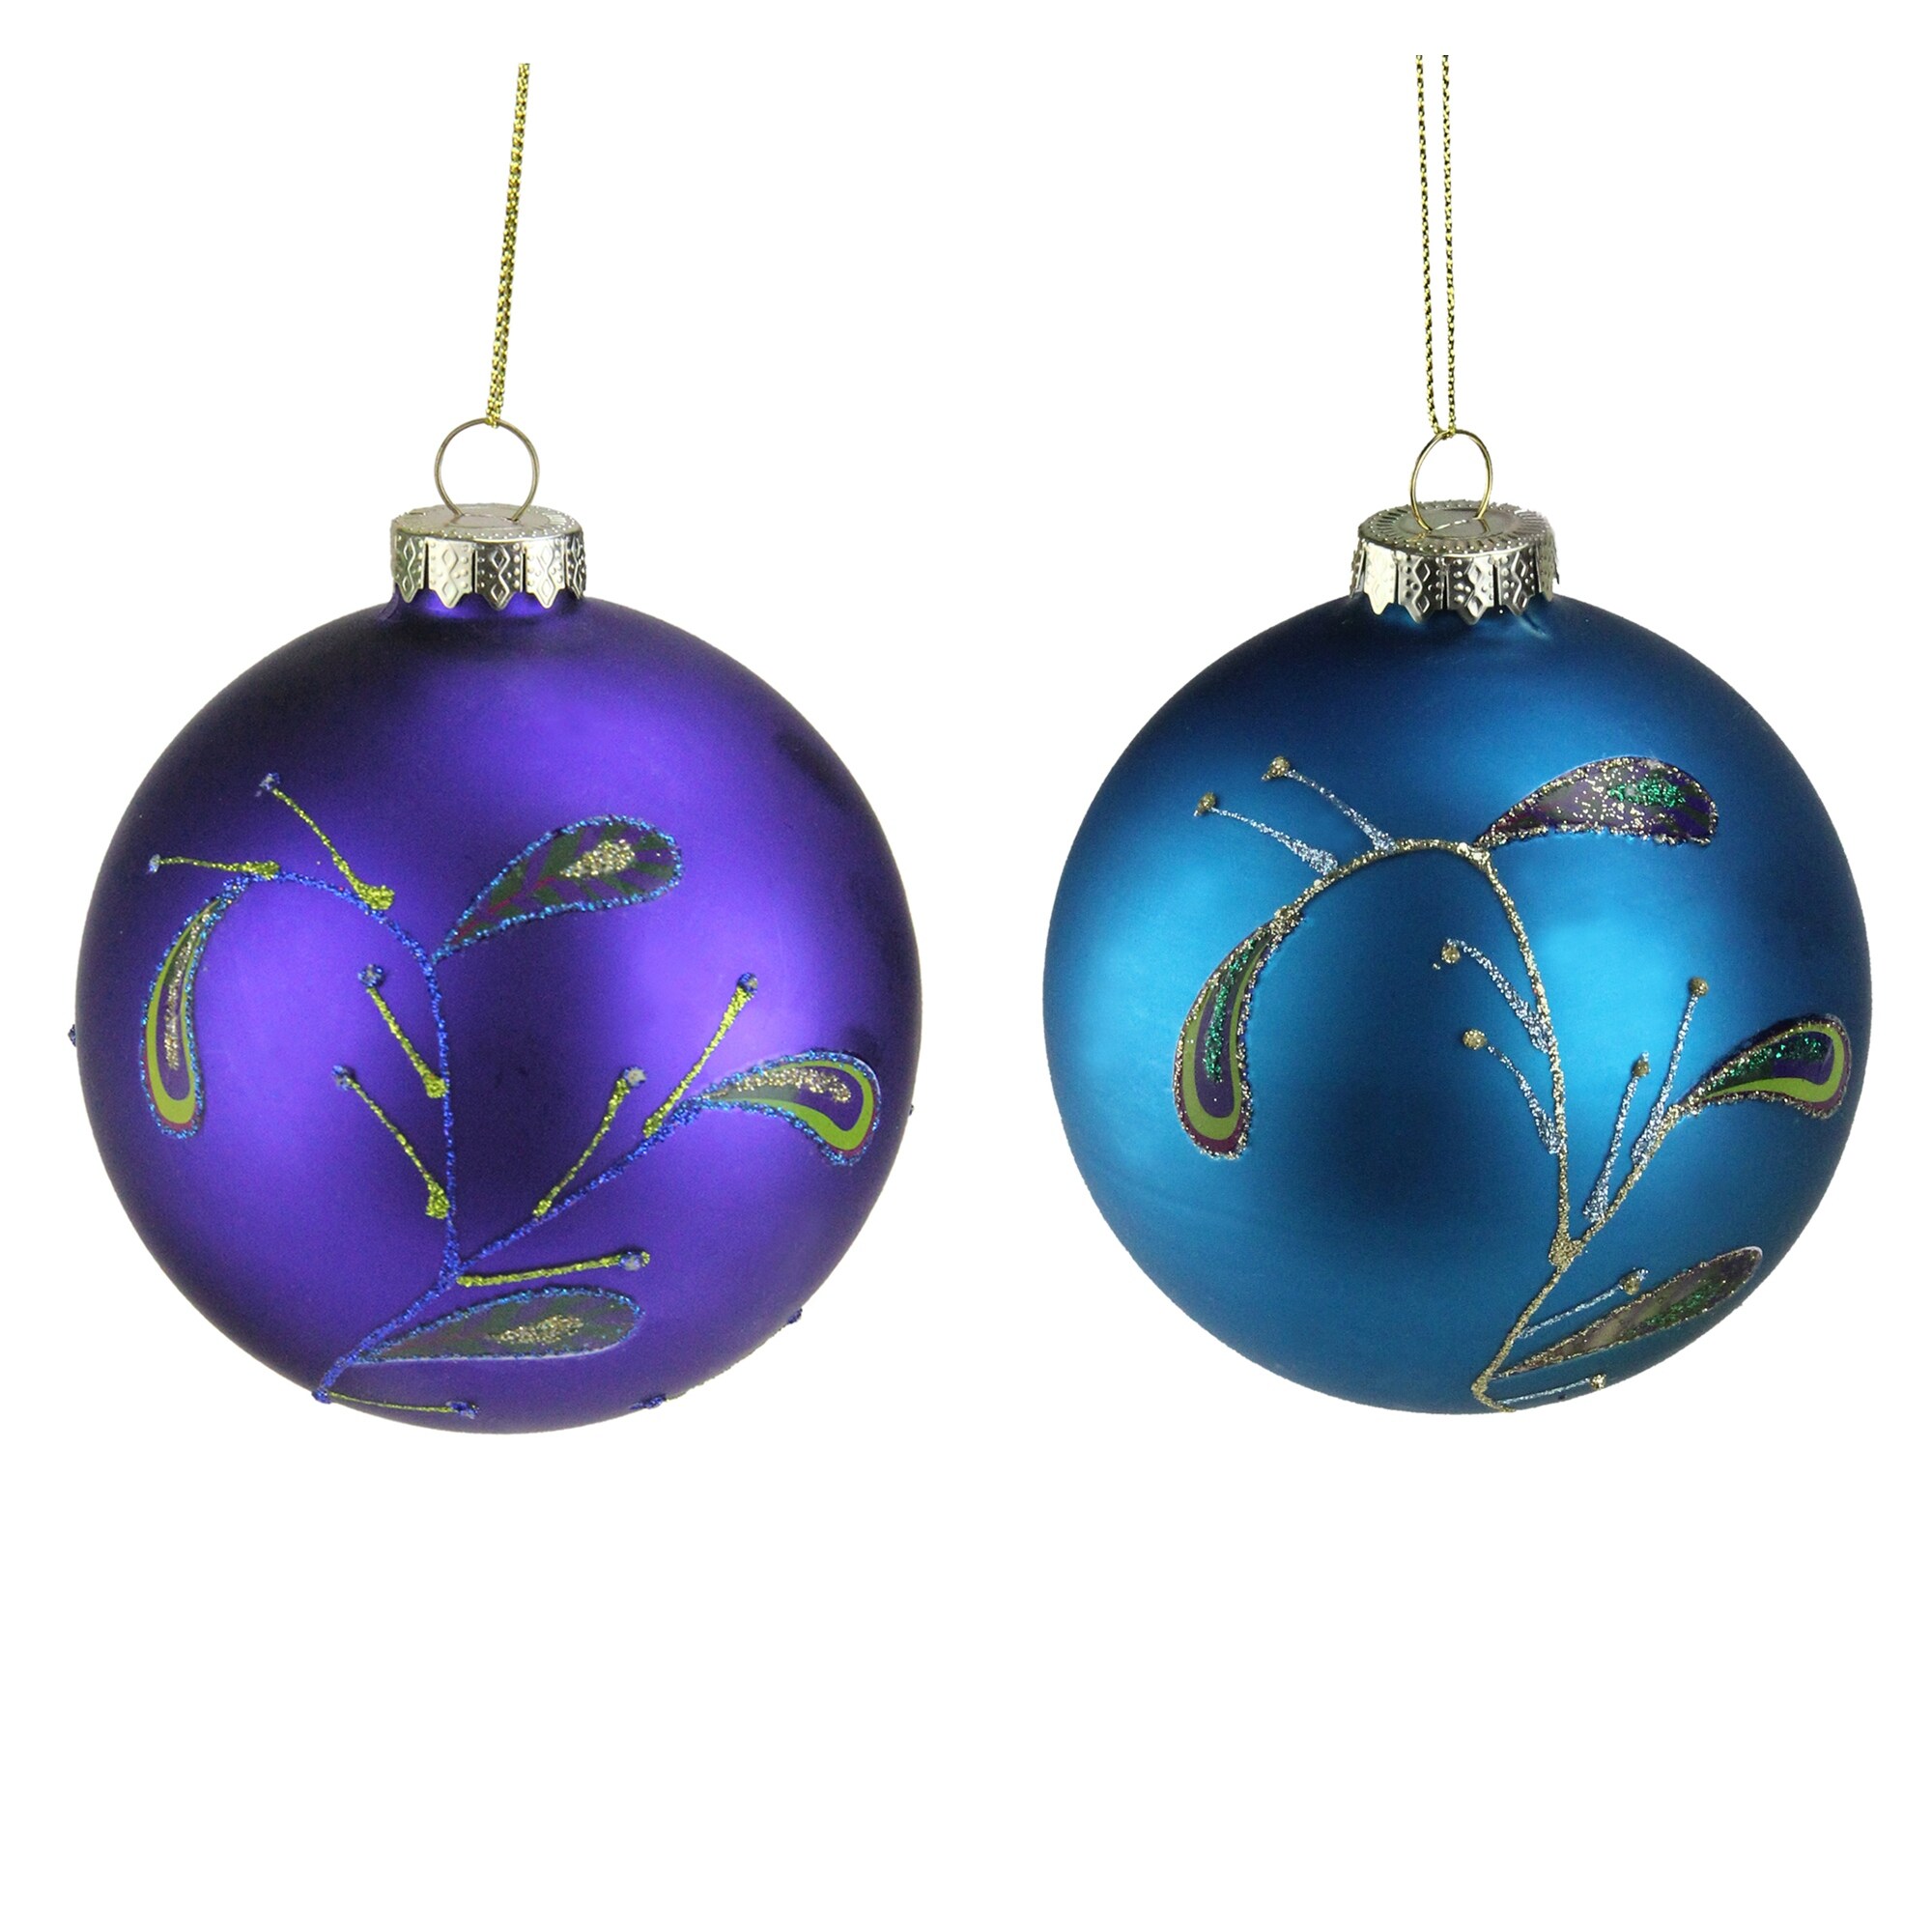 Glass Peacock Ball Ornaments Set Of 4 – DesignedBy The Boss